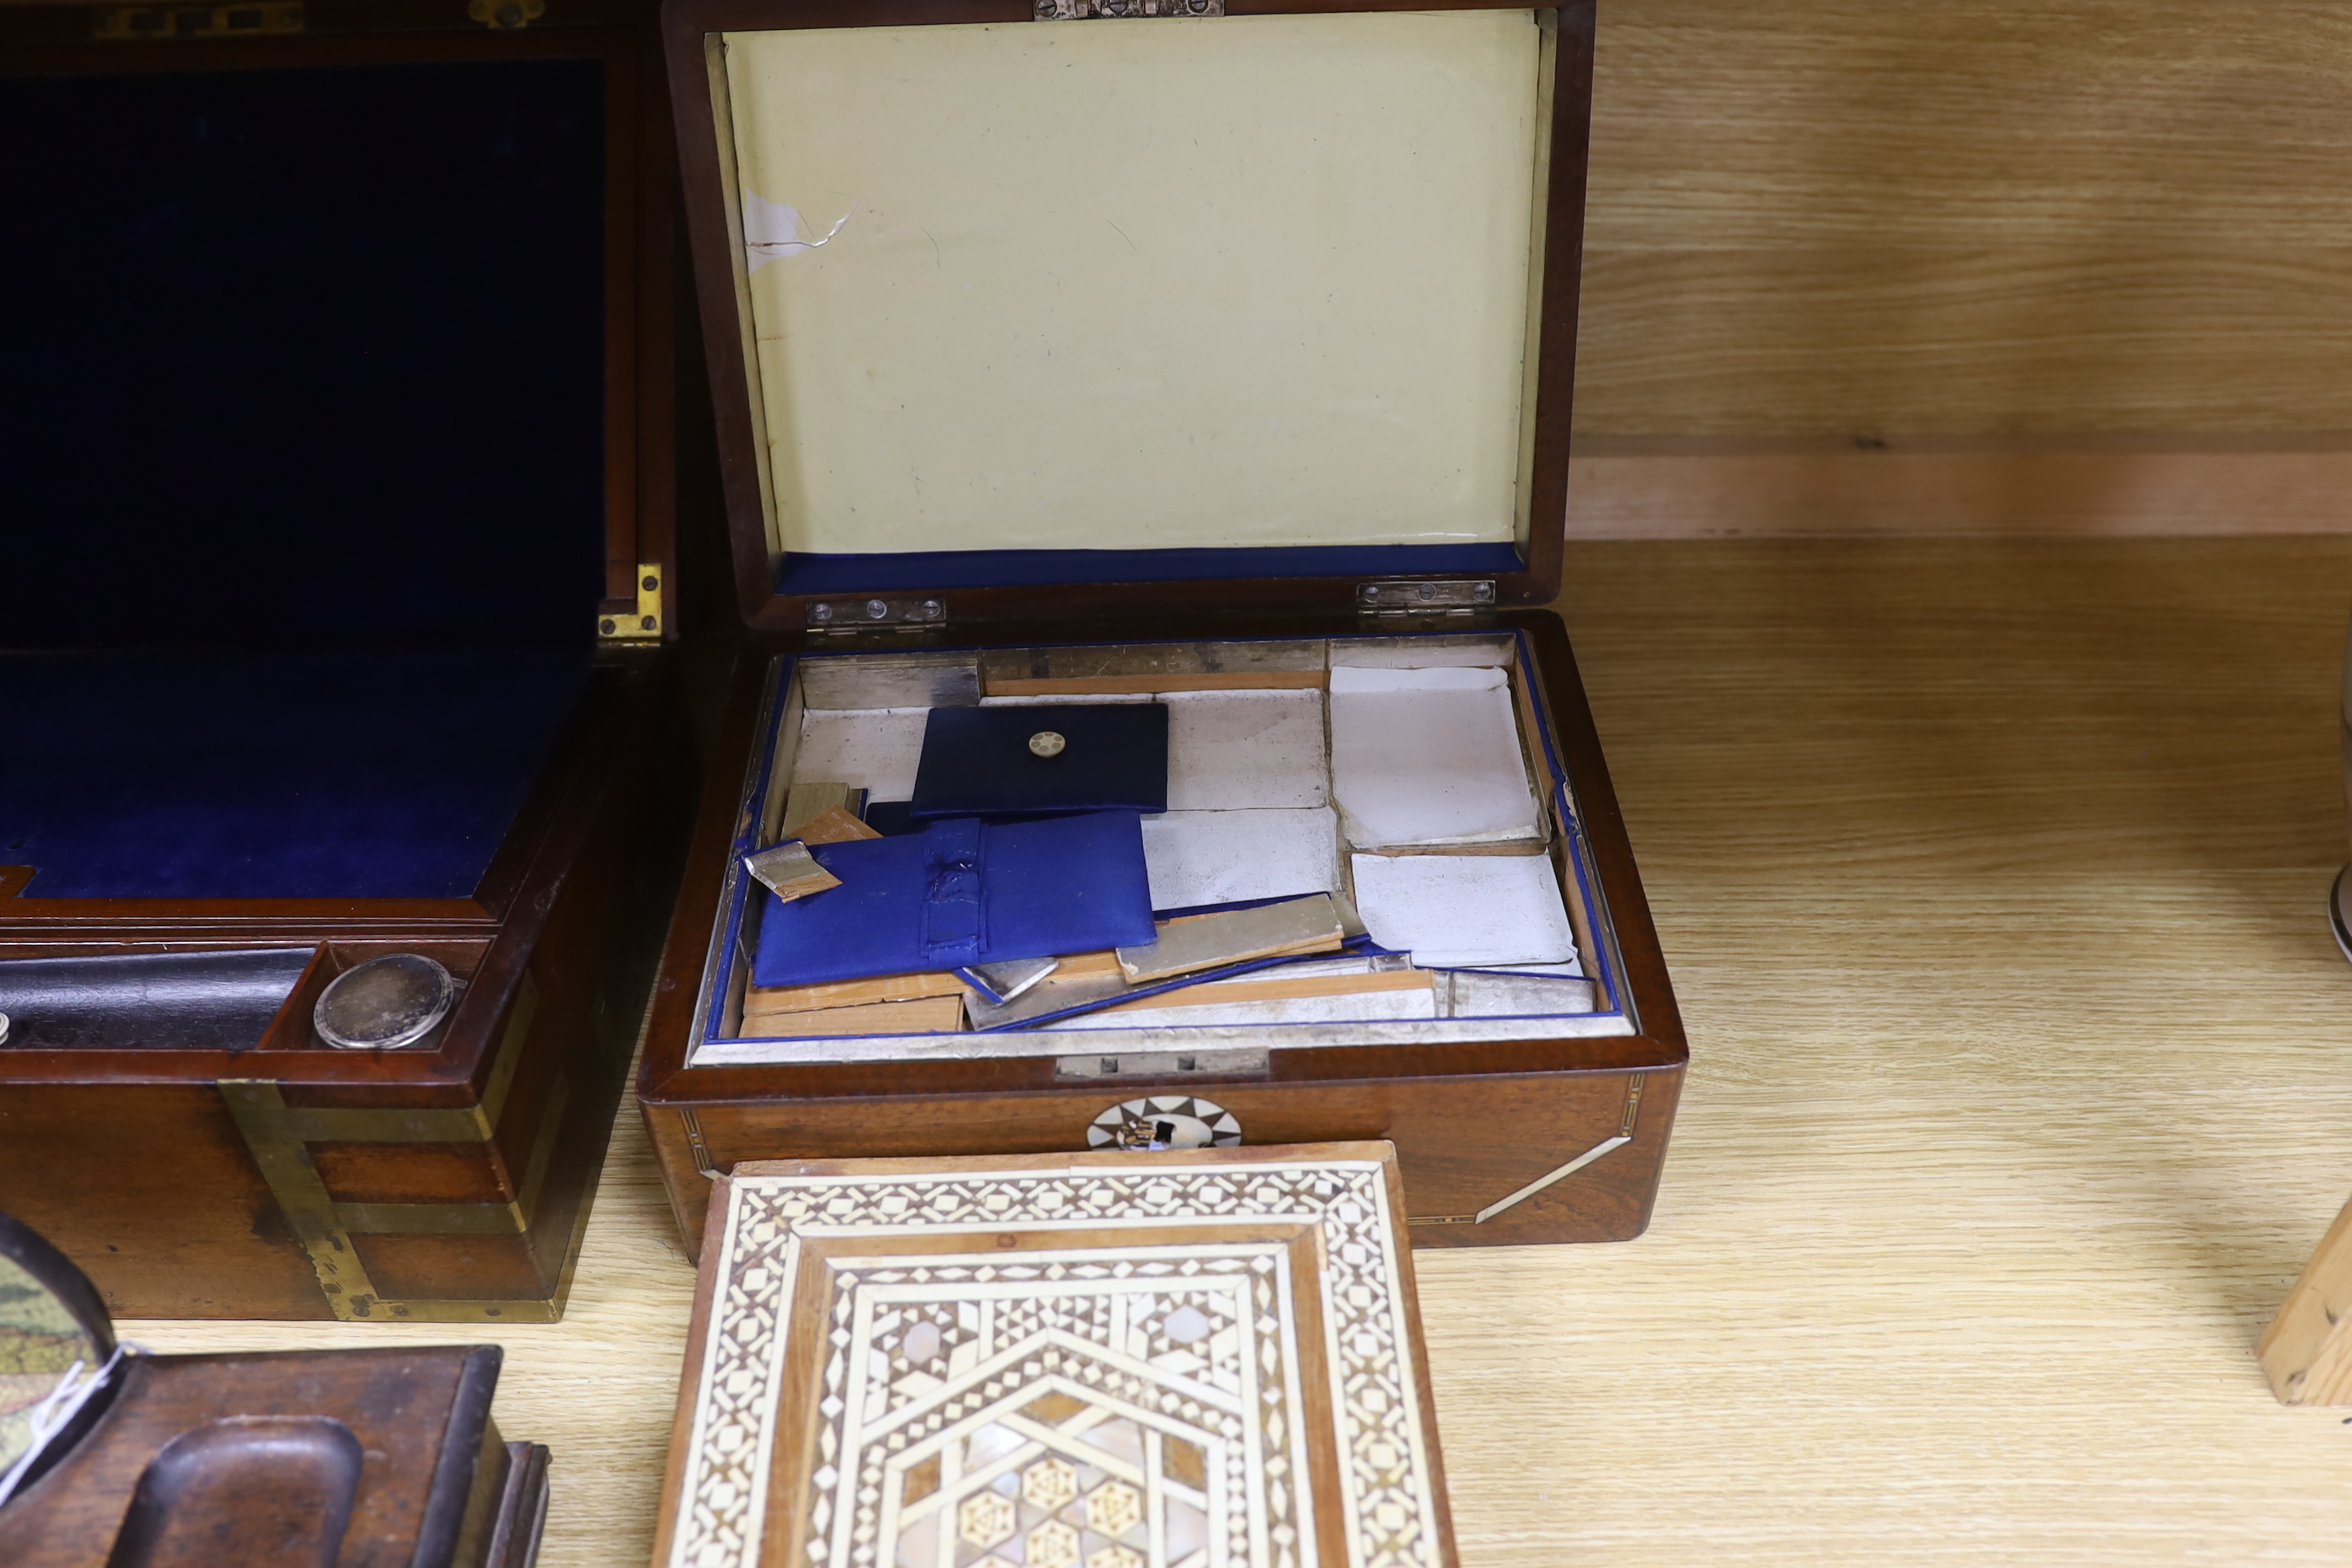 Four various boxes - a brass bound writing slope, a Moroccan inlaid box, mother of pearl inlaid sewing box and another